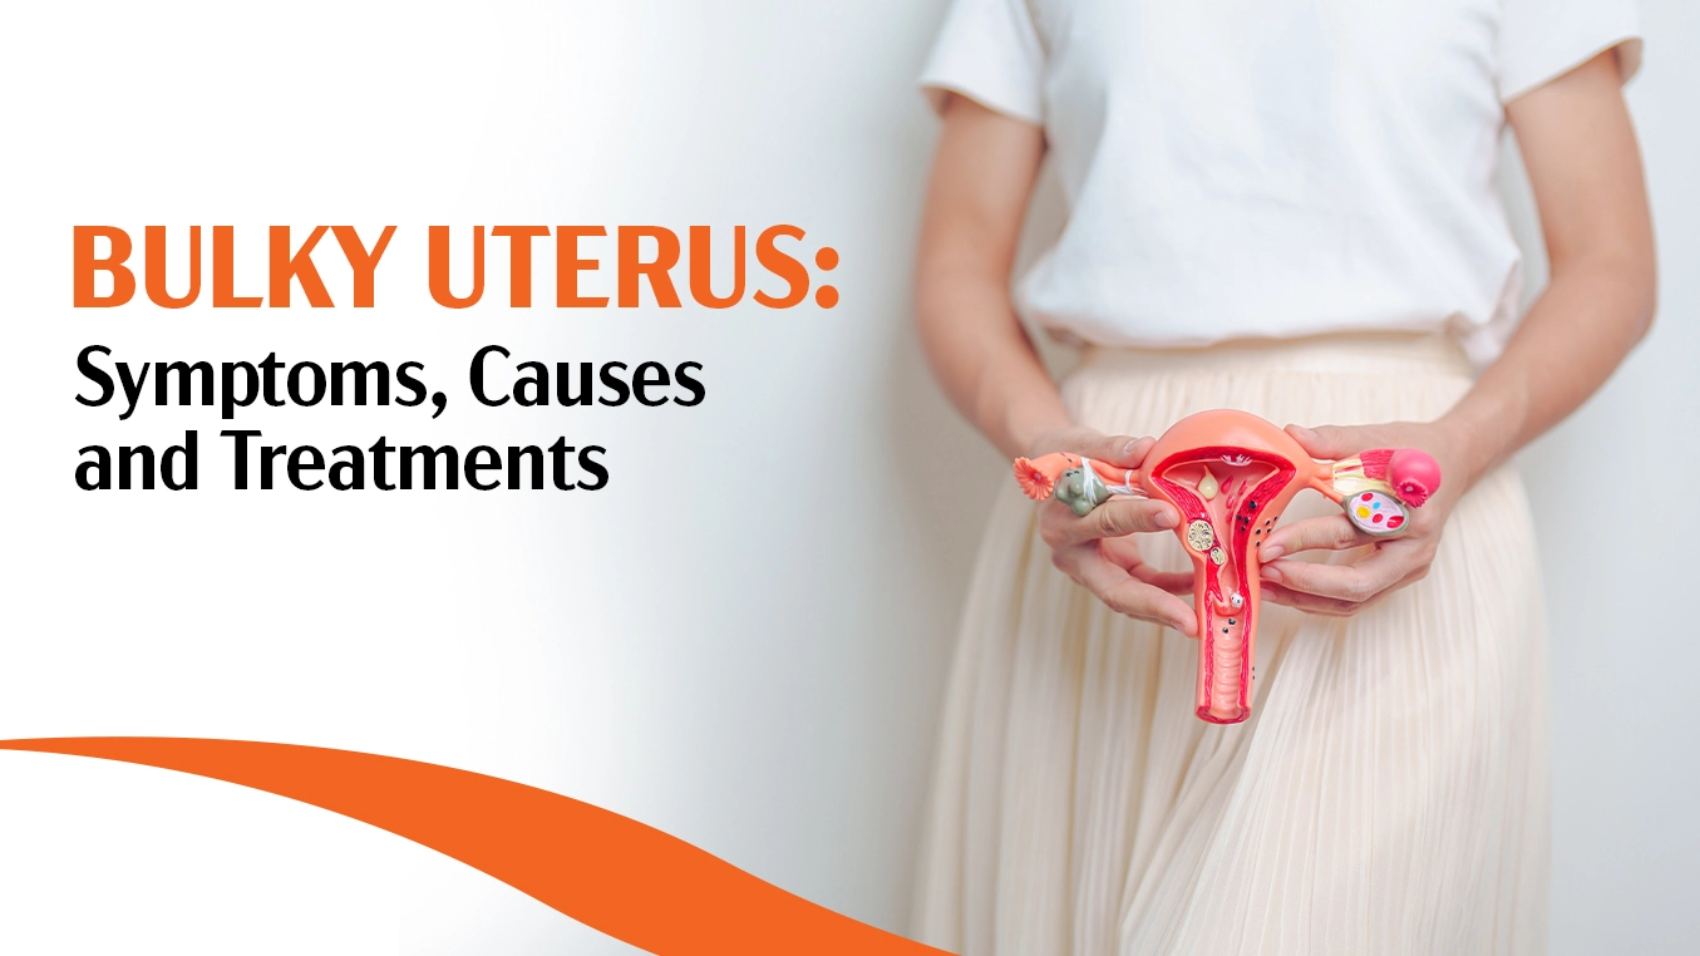 Bulky Uterus Symptoms, Causes, and Treatment 1